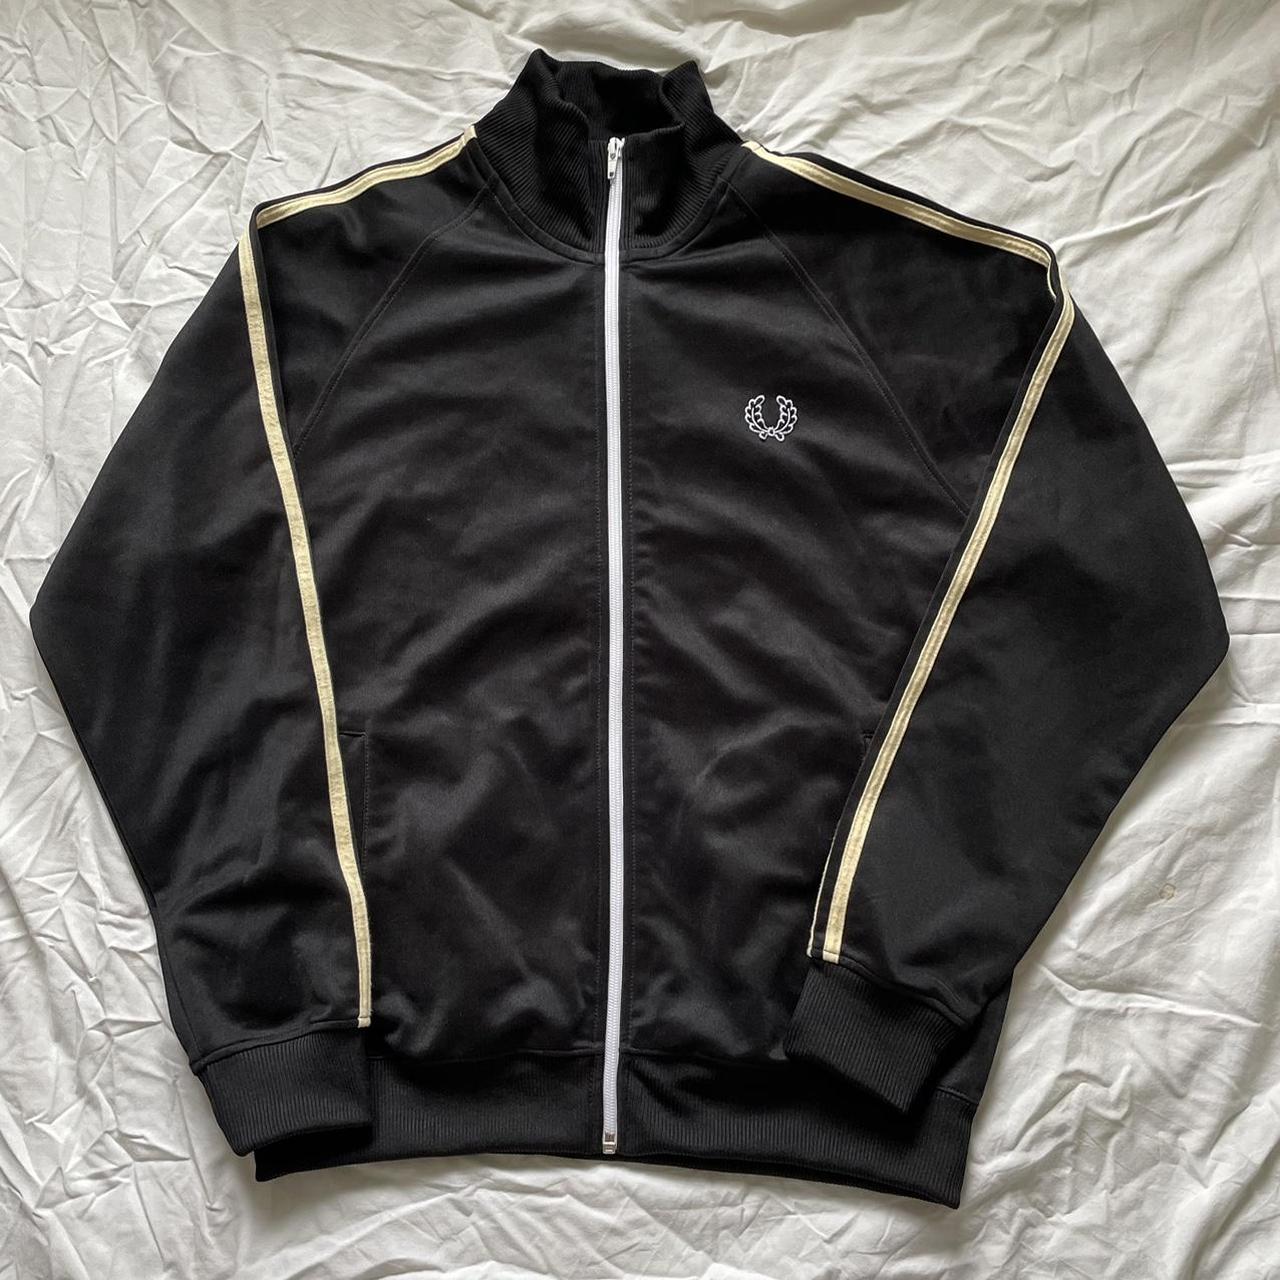 Fred Perry Men's Black and Cream Jacket | Depop